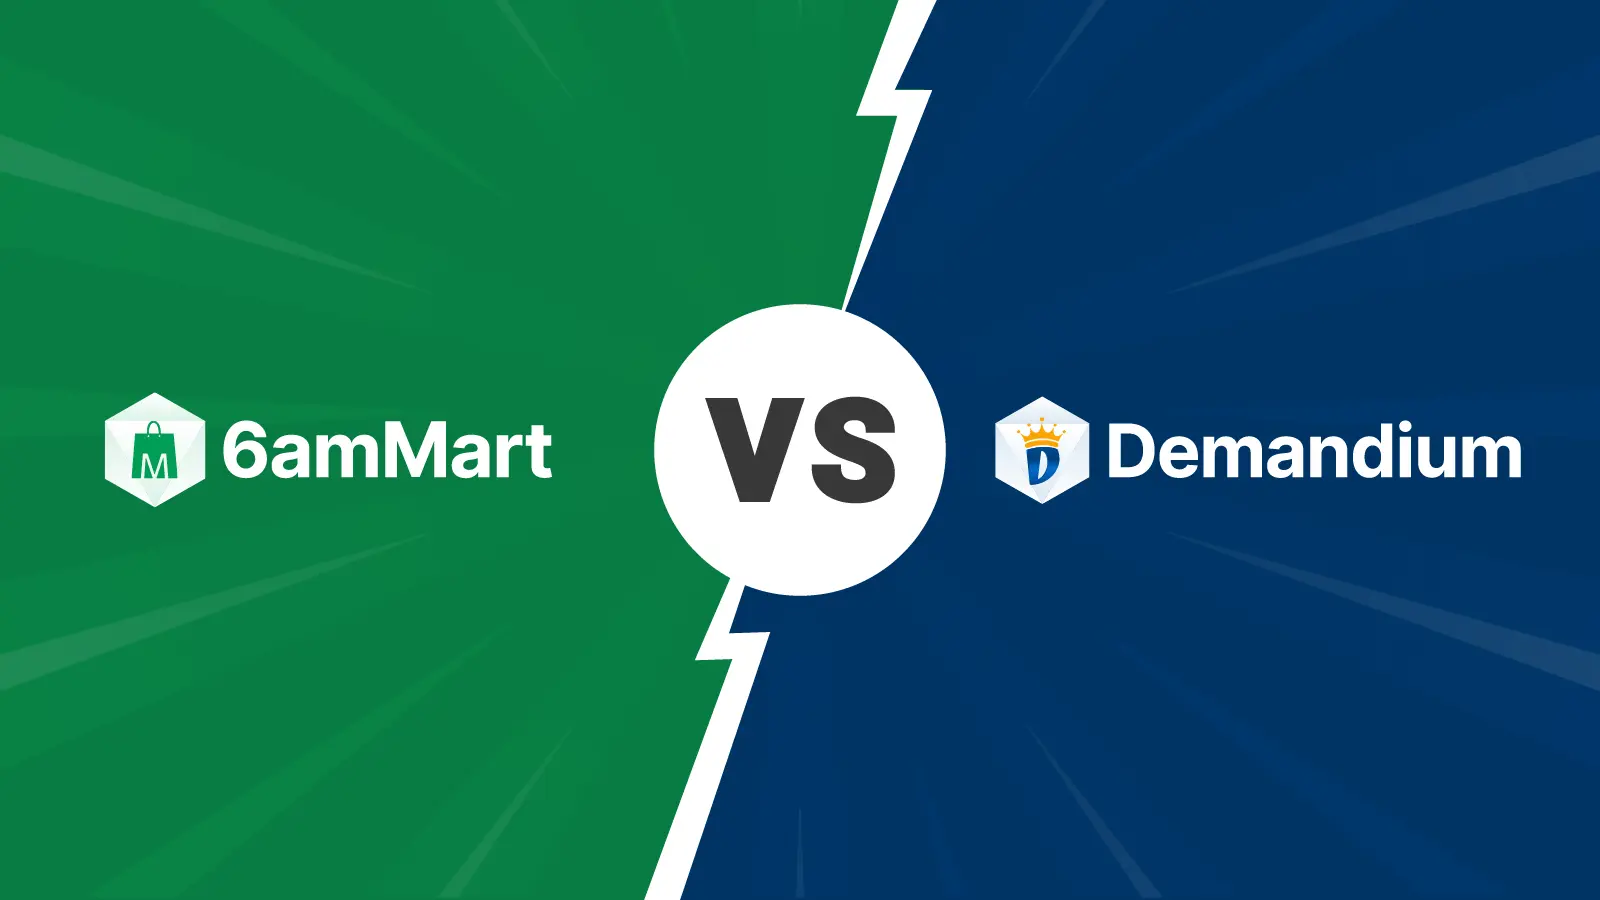 6amMart vs Demandium: What's The Difference